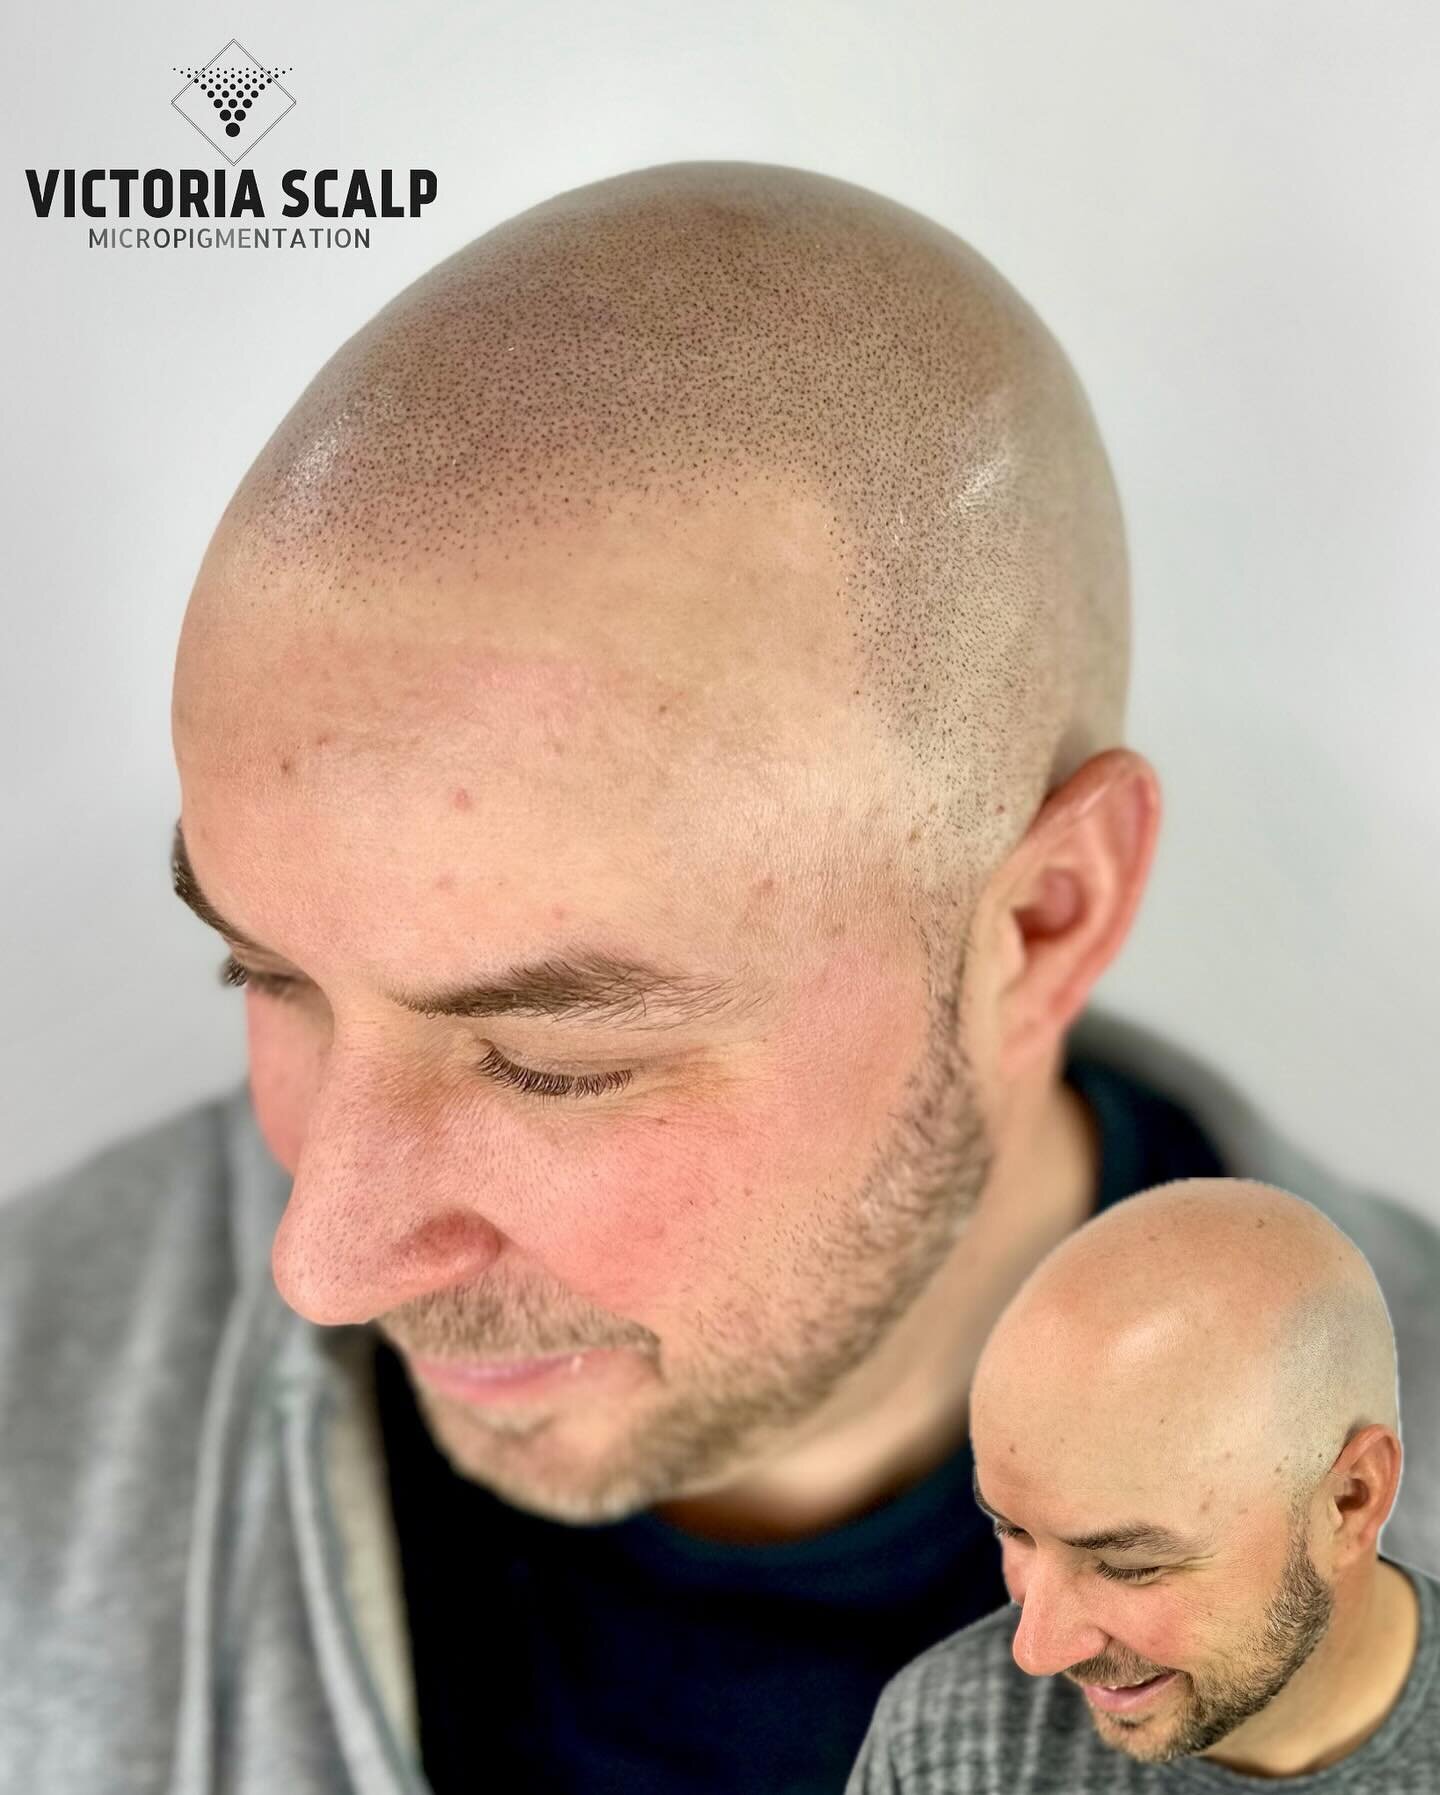 💥FINAL RESULTS 💥
&bull;crown to hairline SMP&bull;
&gt;&gt;&gt;SWIPE for ZOOMables

Norwood 7 transformation. Natural, soft hairline for this client! Even with the rotary shave&hellip;this was a big job. That was a HARD 7 🤣 * fresh impressions wil